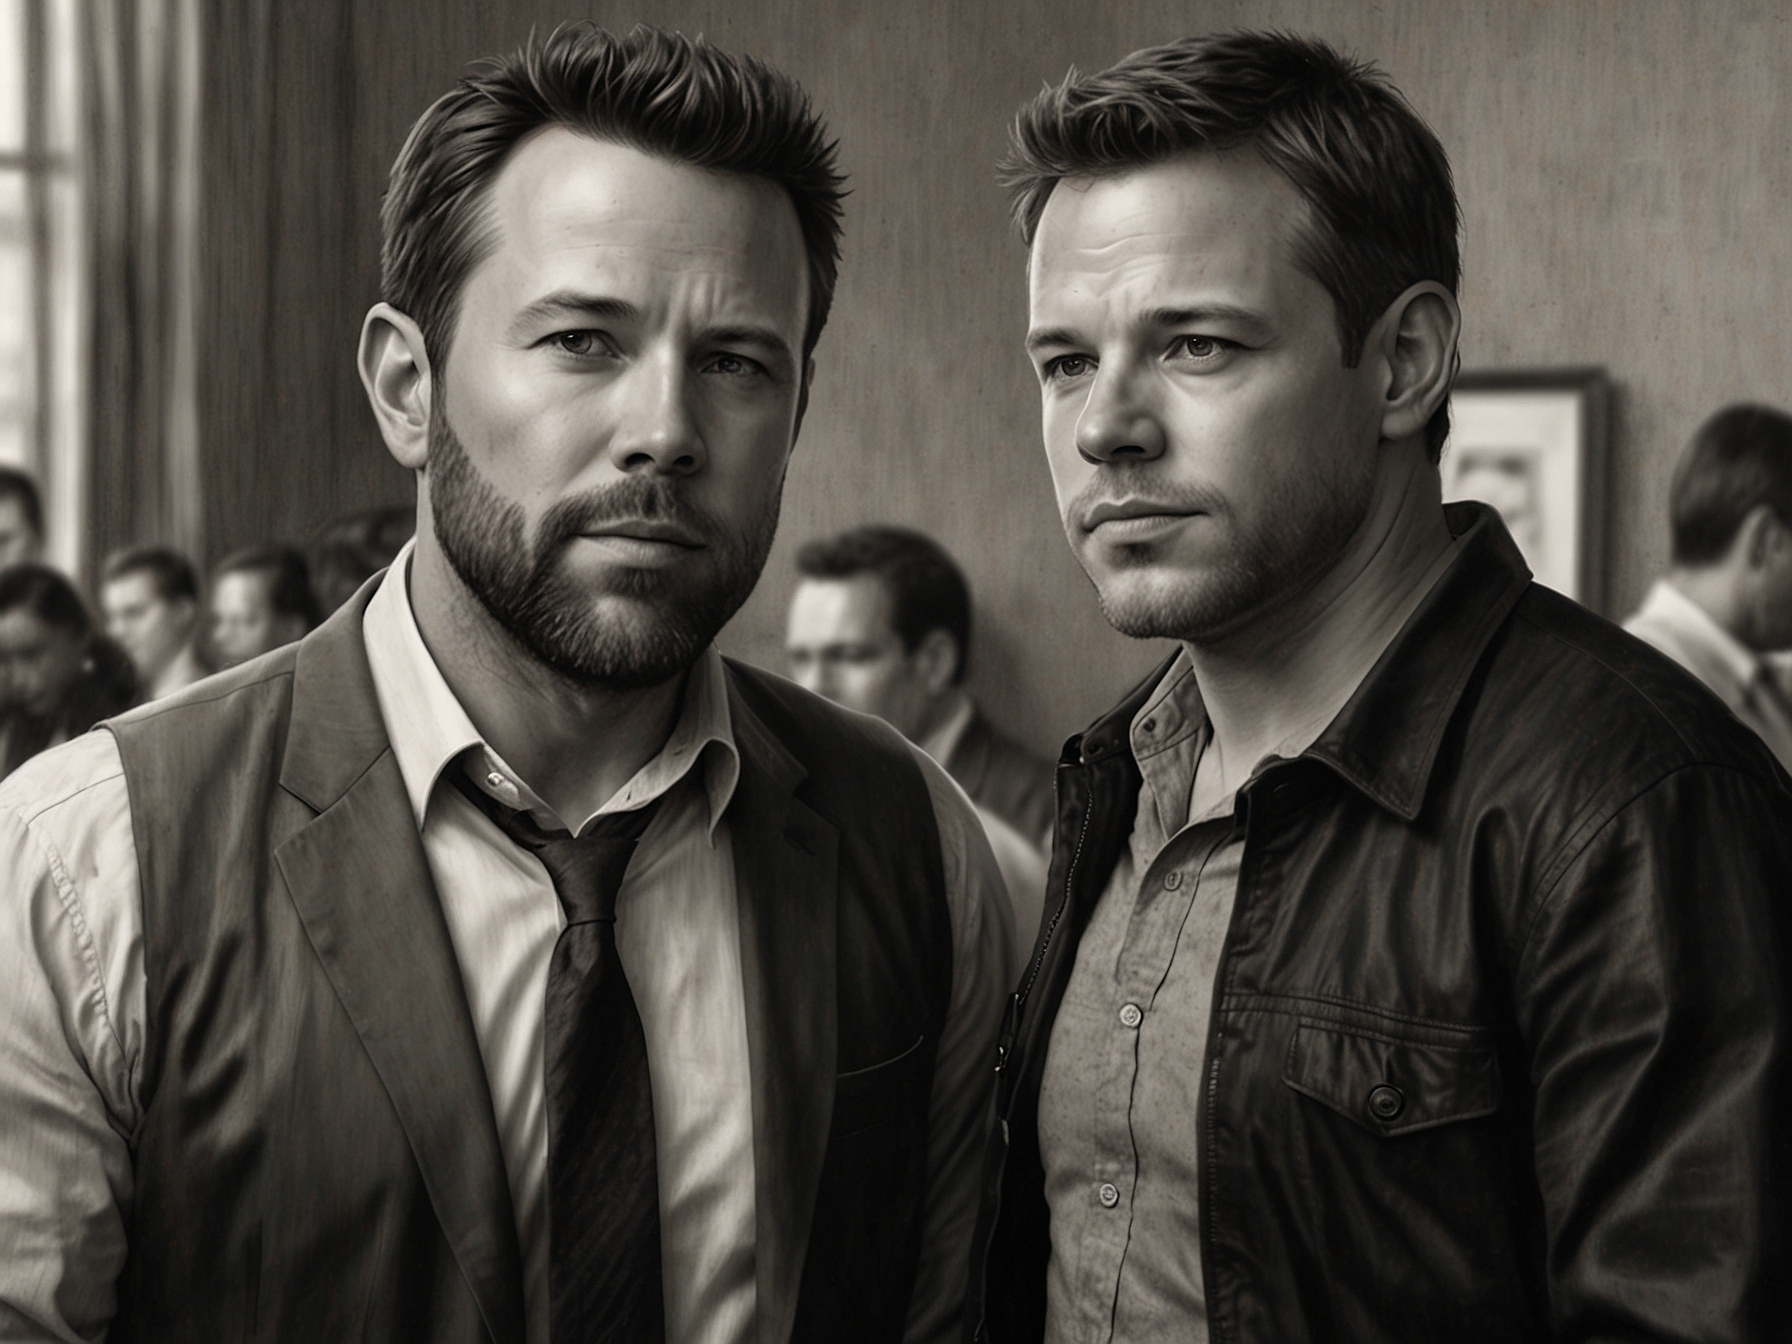 Ben Affleck and Matt Damon share a moment at a recent Hollywood event, highlighting their decades-long friendship and collaboration, symbolizing Damon’s unwavering support for Affleck.